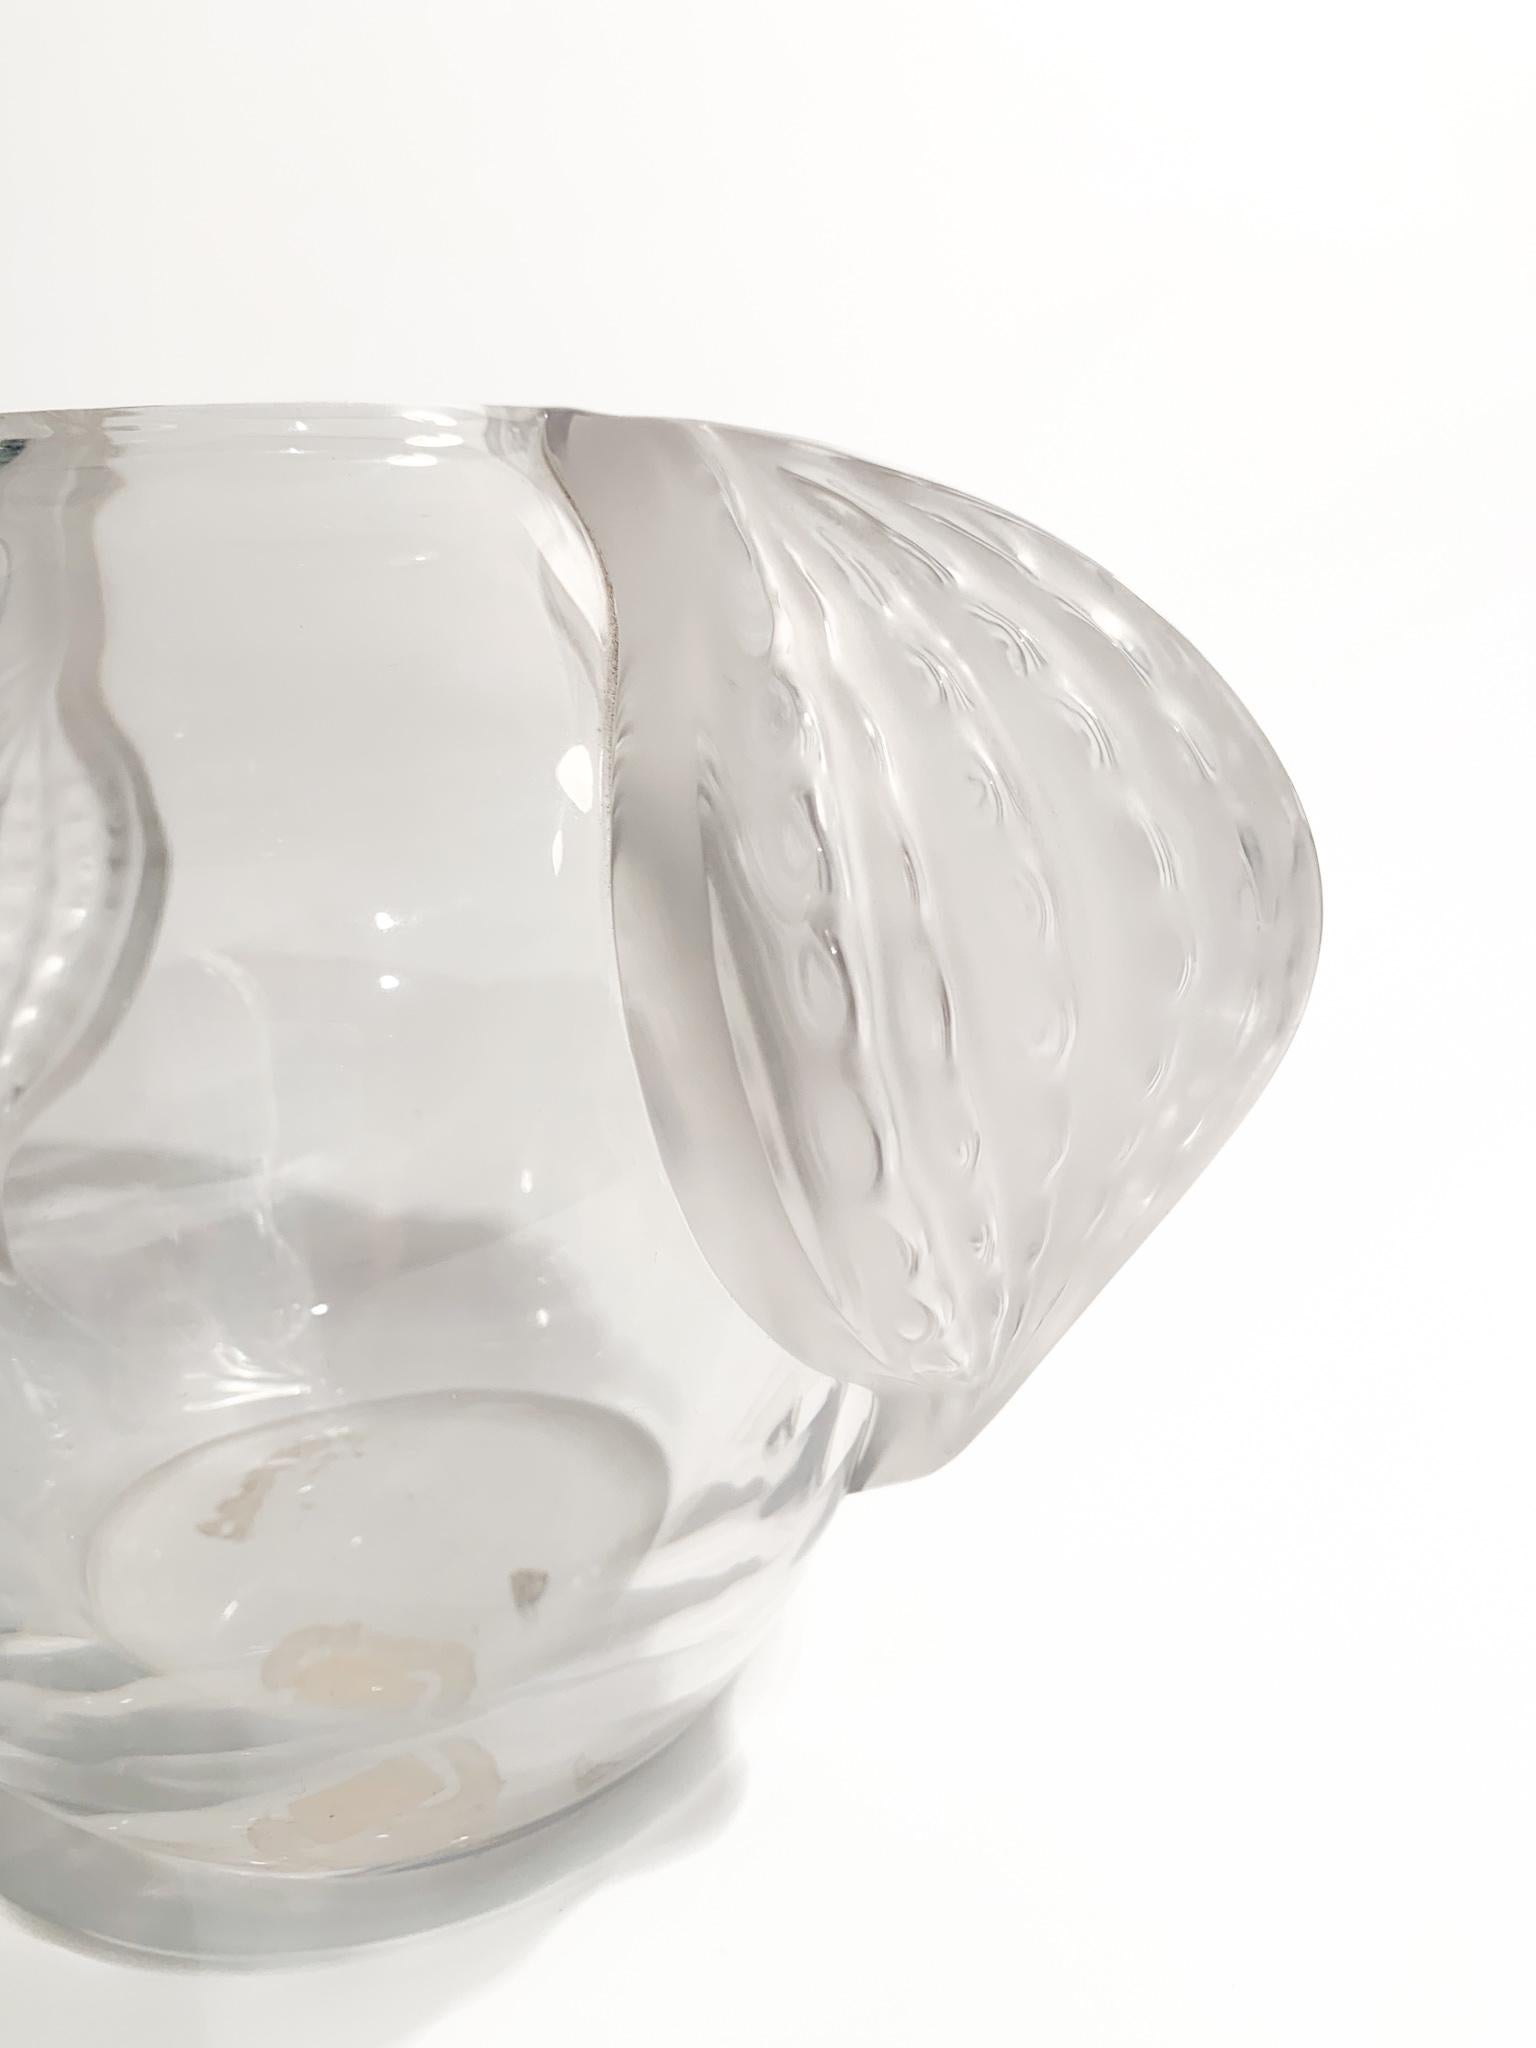 Mid-20th Century French Lalique Crystal Vase, San Diego Model, 1940s For Sale